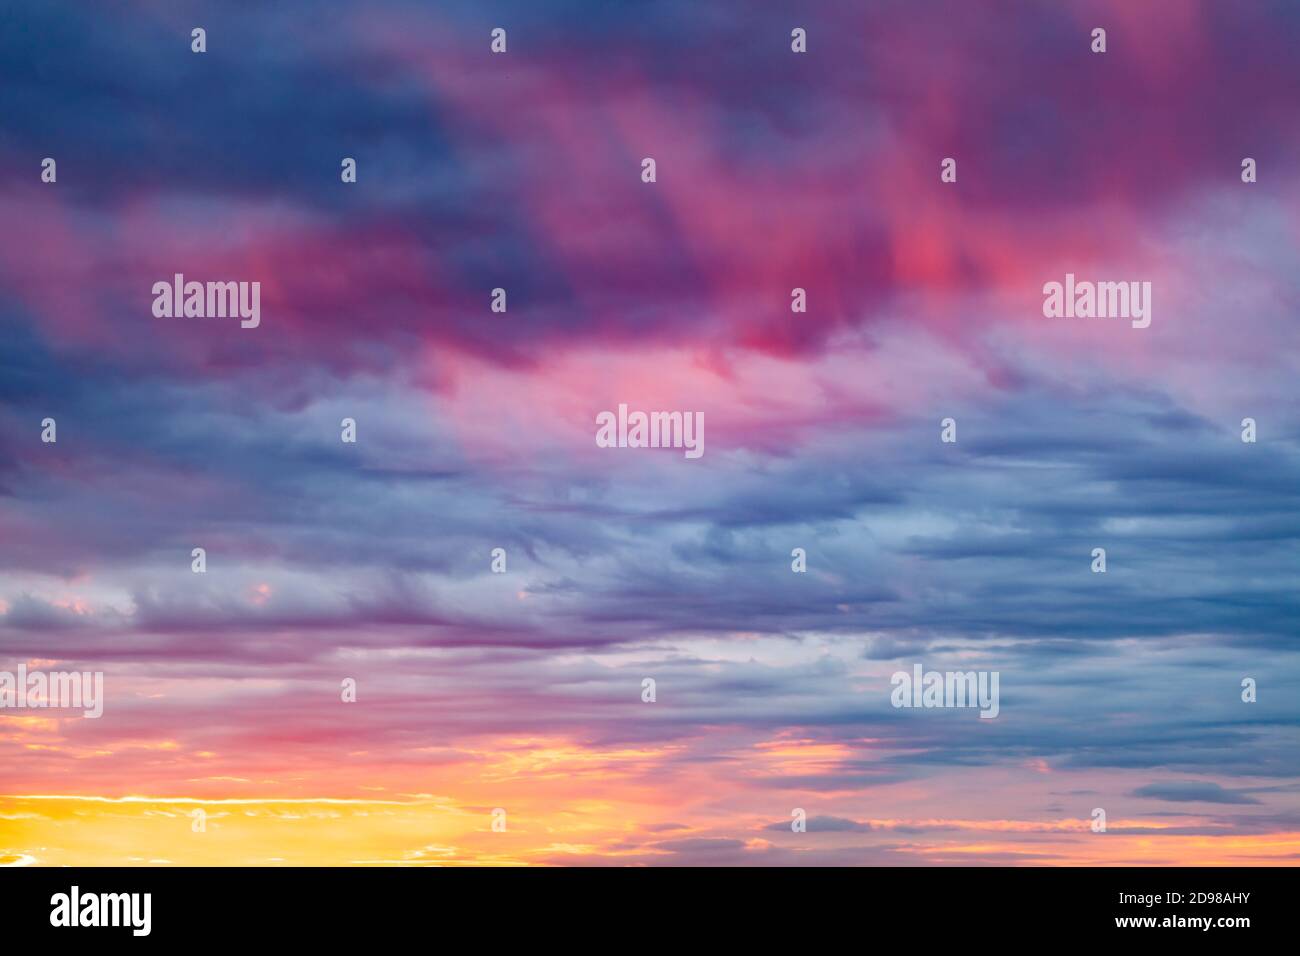 sunny sunset in cloudy blue sky with flame tongues Stock Photo